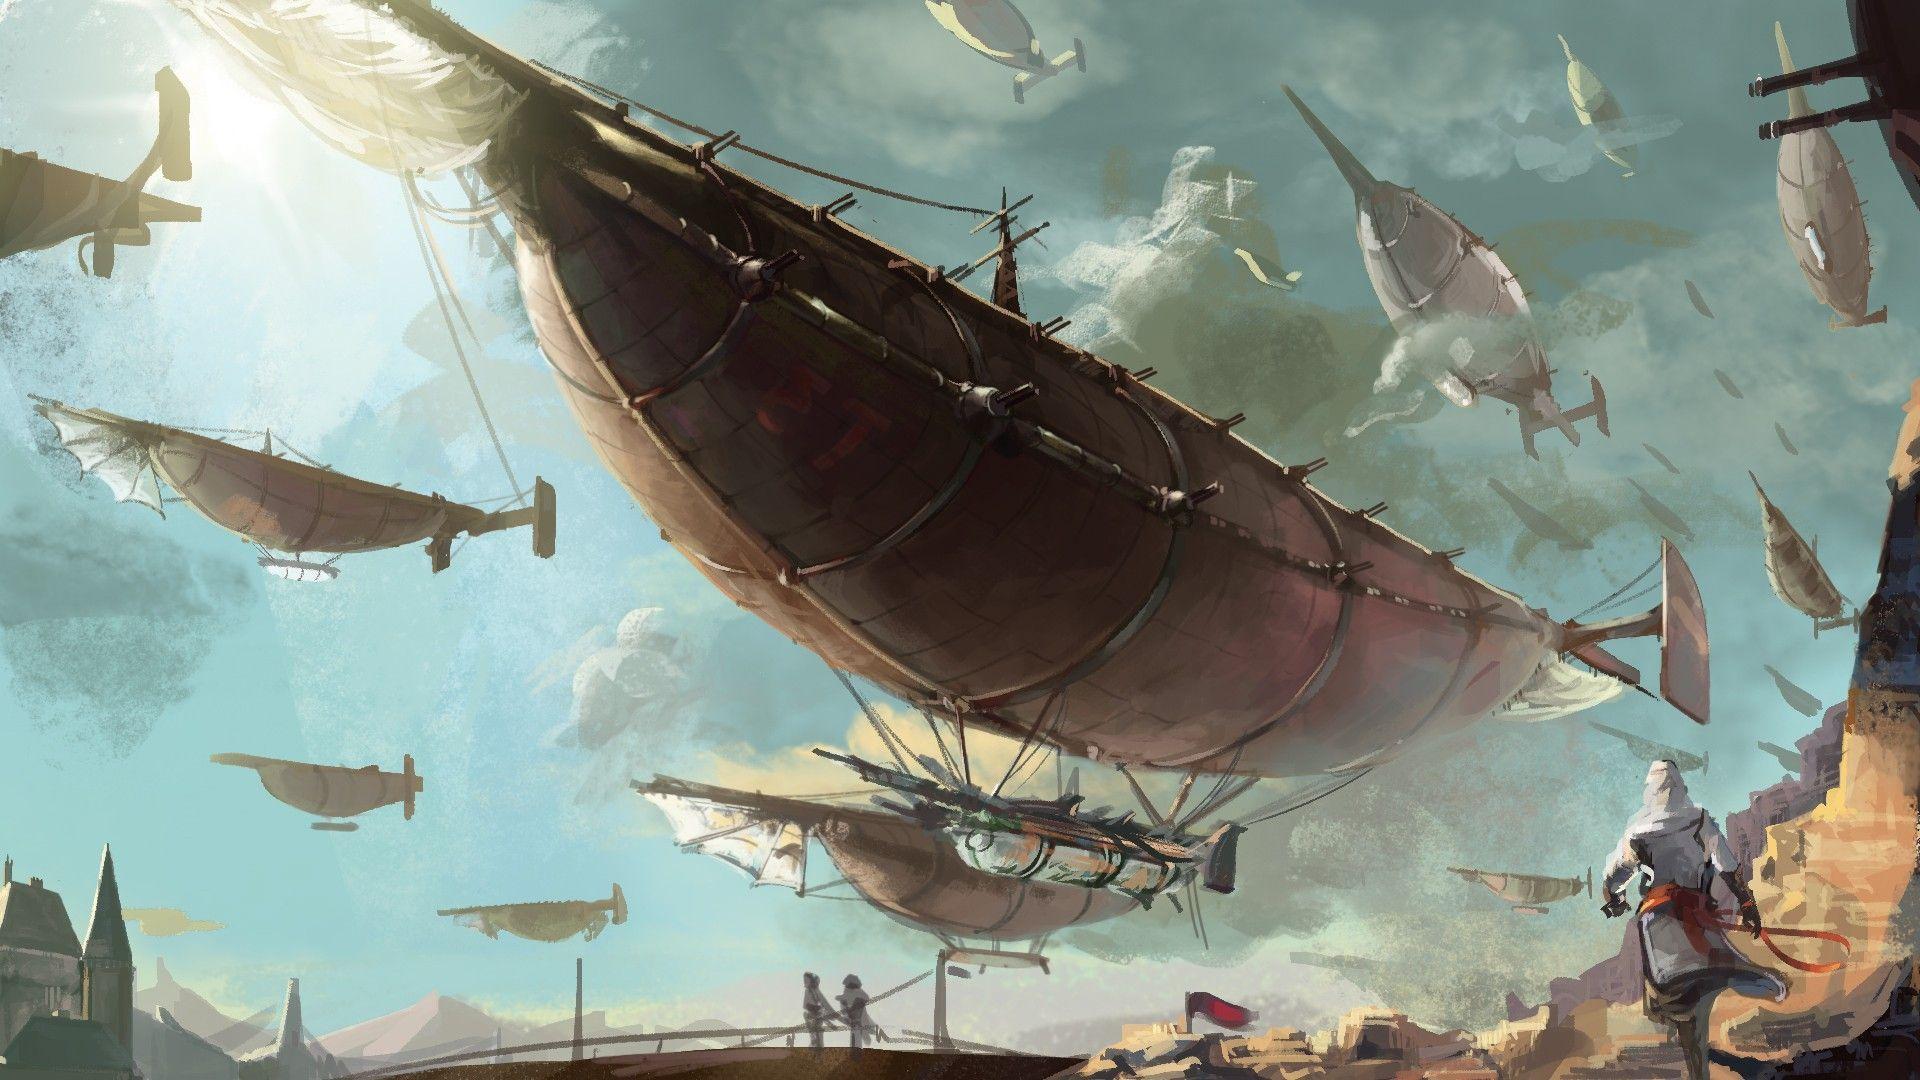 Troop steampunk airship wallpaper and image, picture